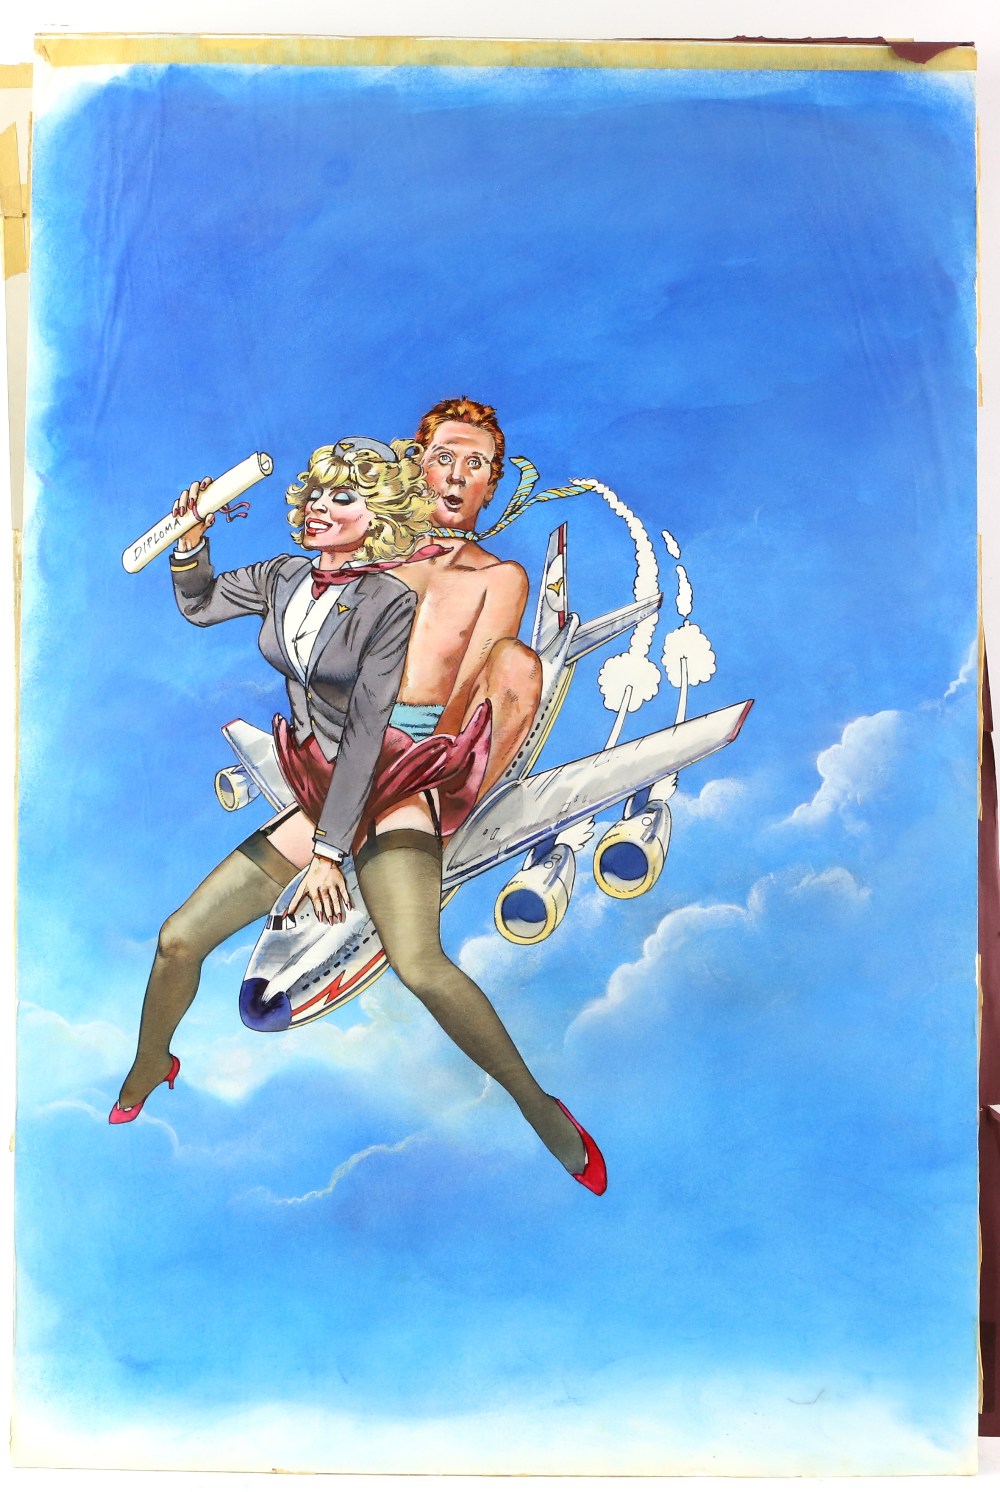 Stewardess School (1986) Original concept artwork by the graphic artist Vic Fair, used in the film - Image 2 of 3